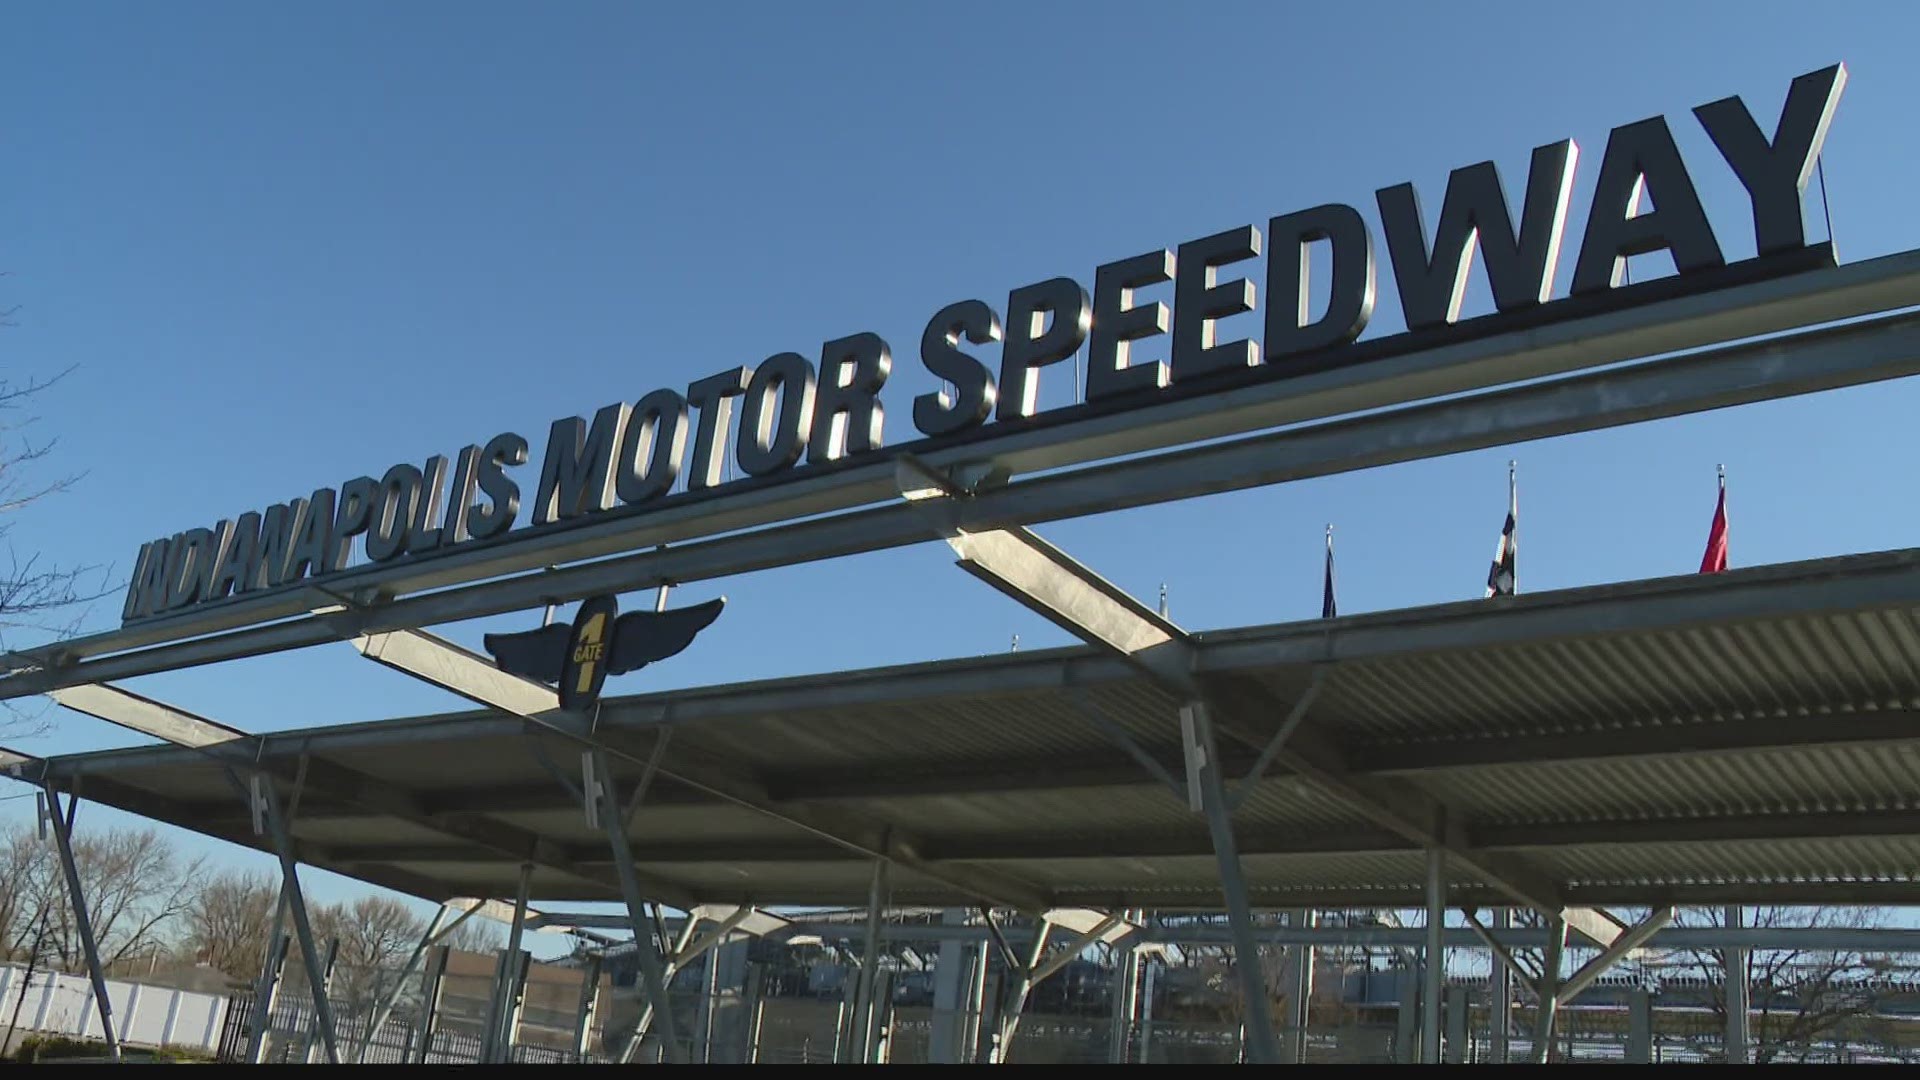 The presidents of IMS, Penske Entertainment Corp., and INDYCAR share an important update about this year's Indianapolis 500 and fans in the stands.